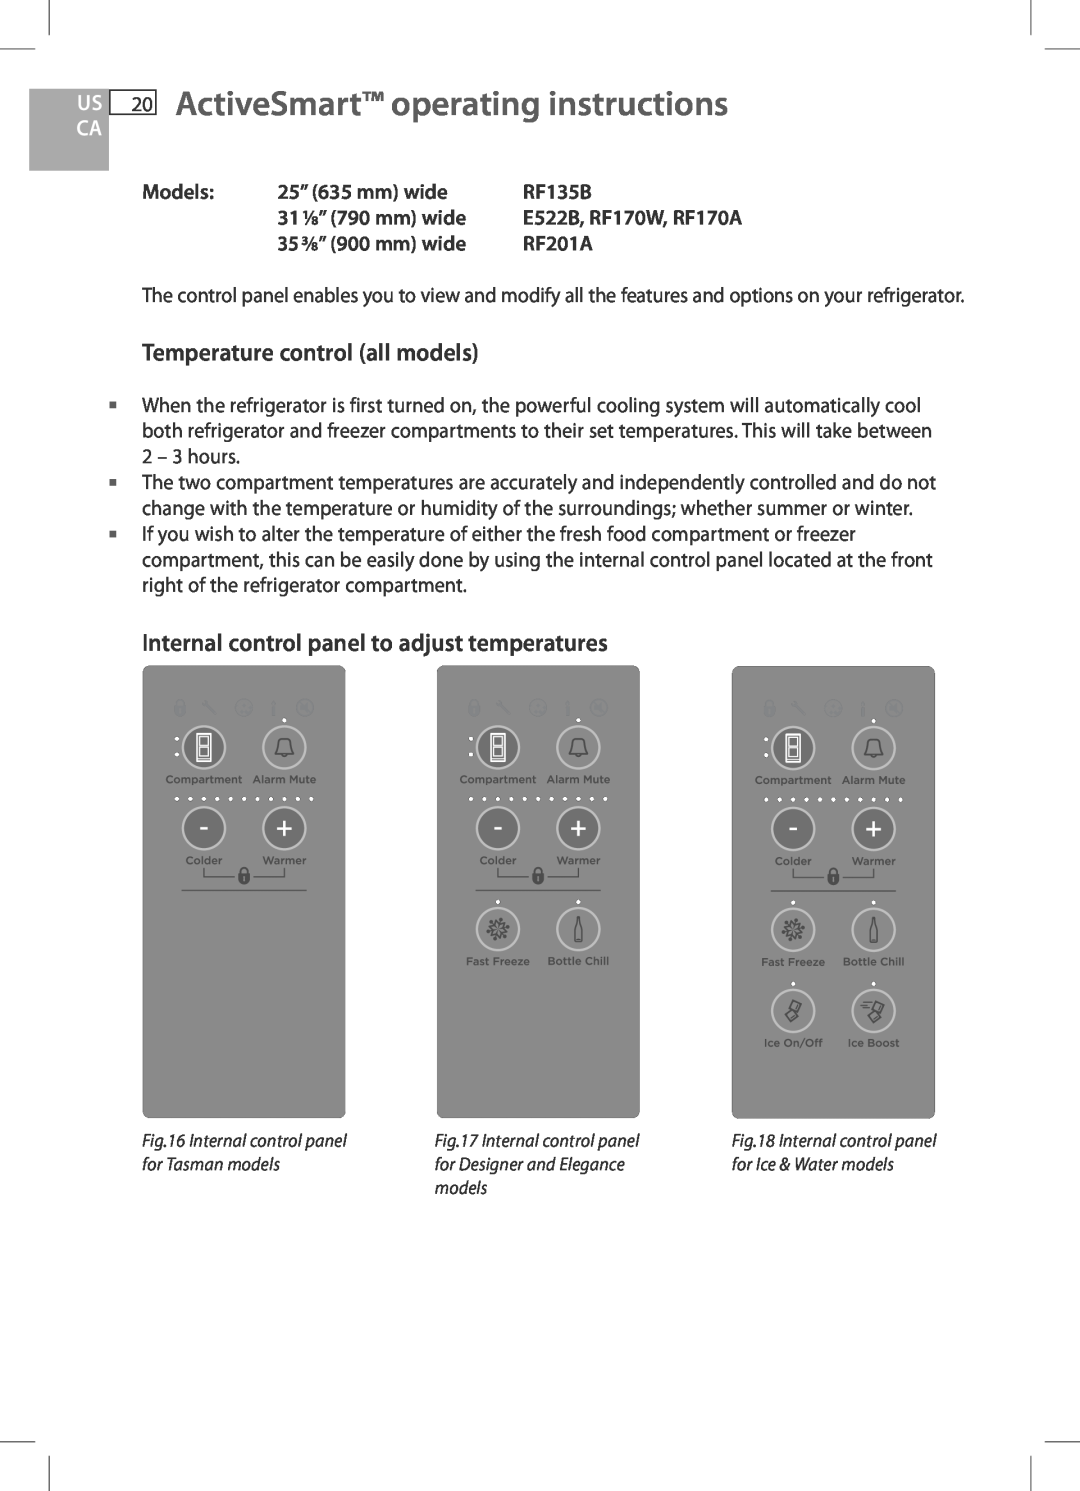 Fisher & Paykel RF201A US 20 ActiveSmart operating instructions, Temperature control all models, Models, 25” 635 mm wide 